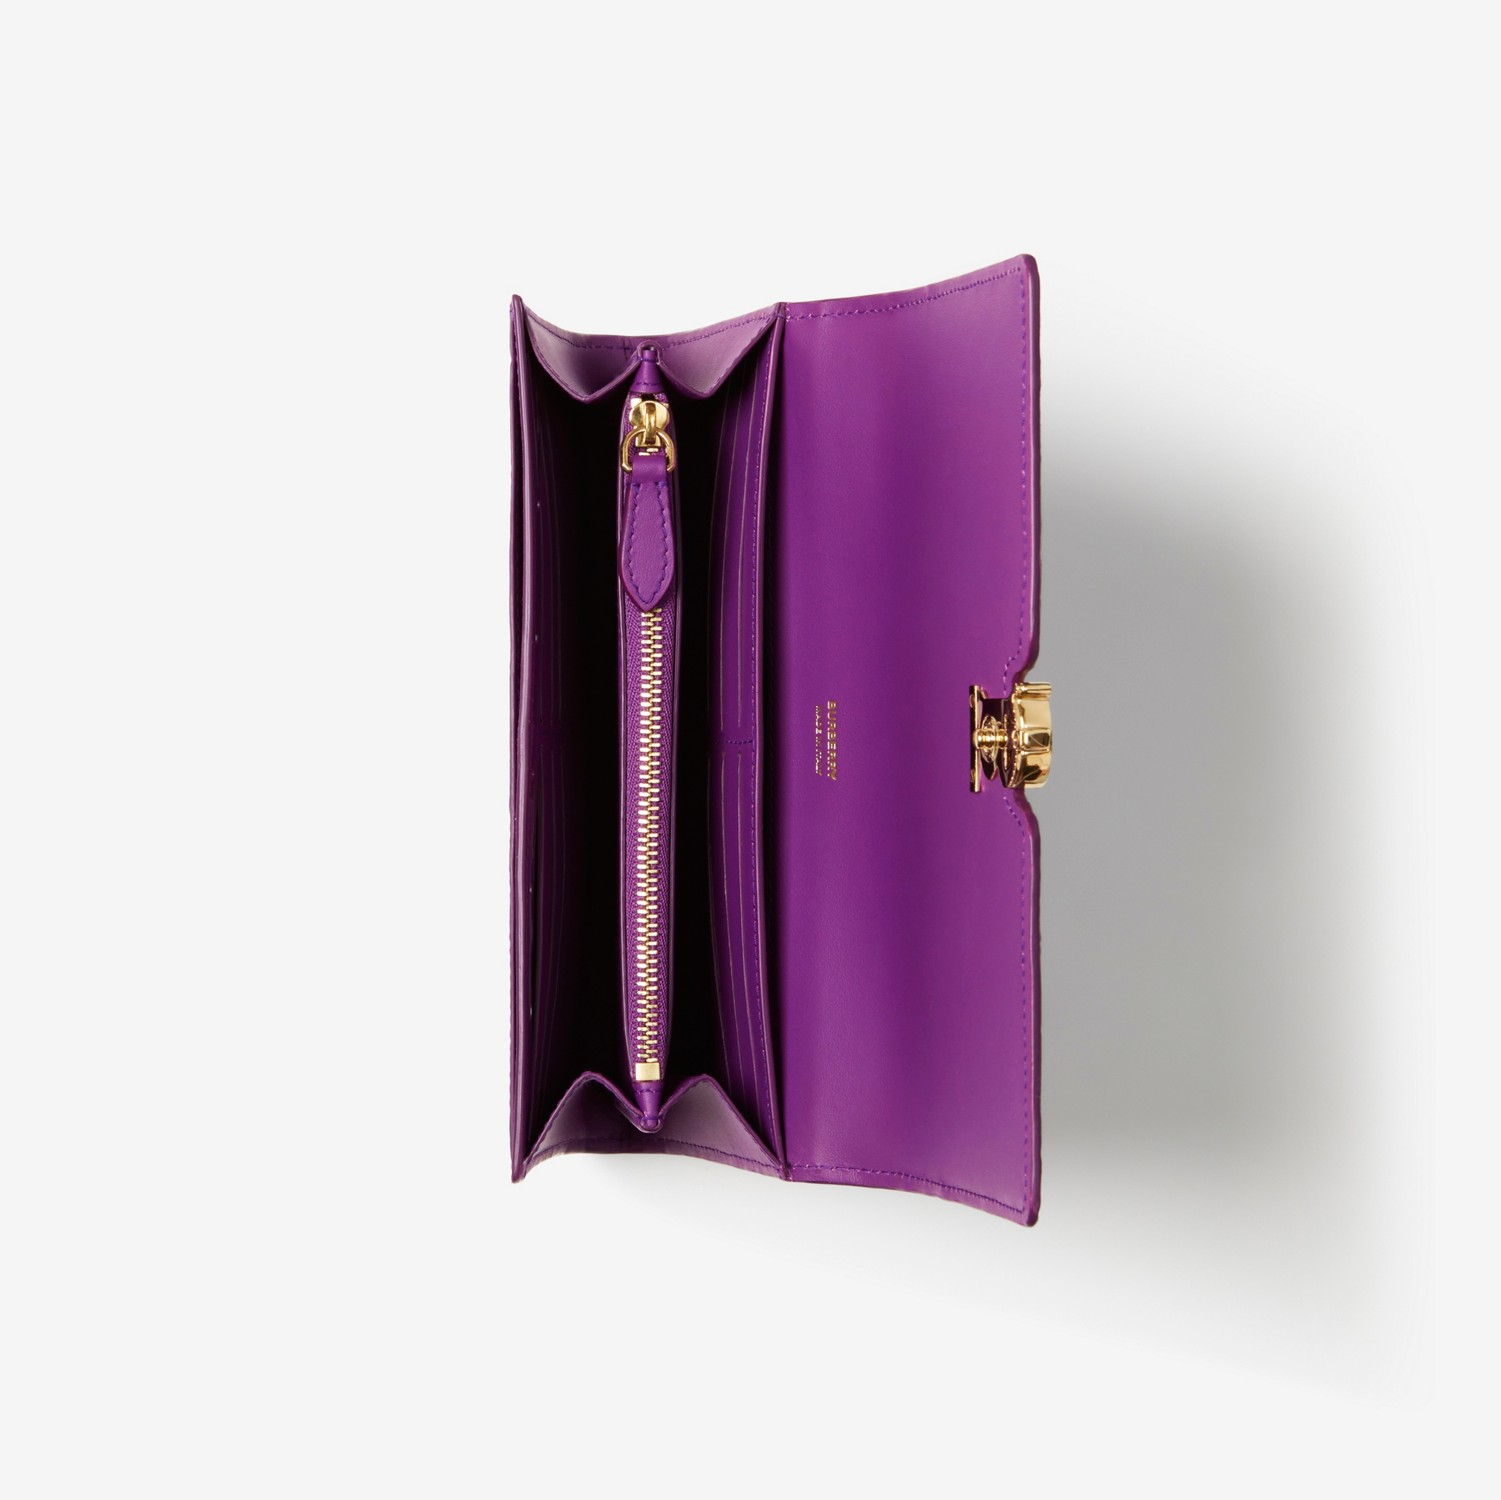 Leather TB Continental Wallet in Thistle - Women | Burberry® Official